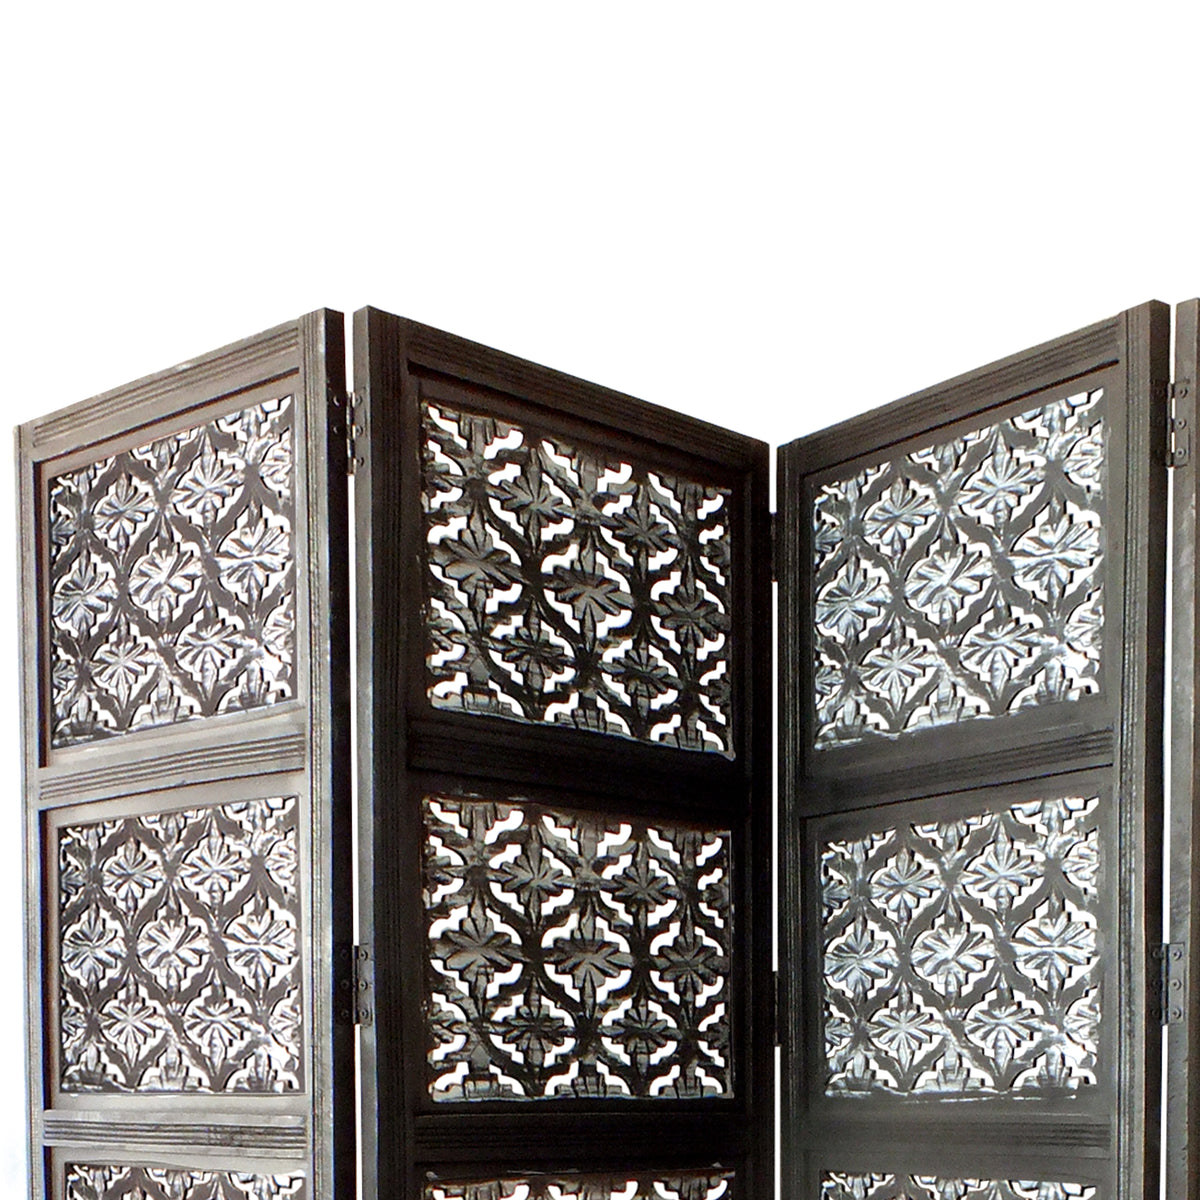 Four Panel Mango Wood Room Divider with Traditional Carvings, Black and White - UPT-195270